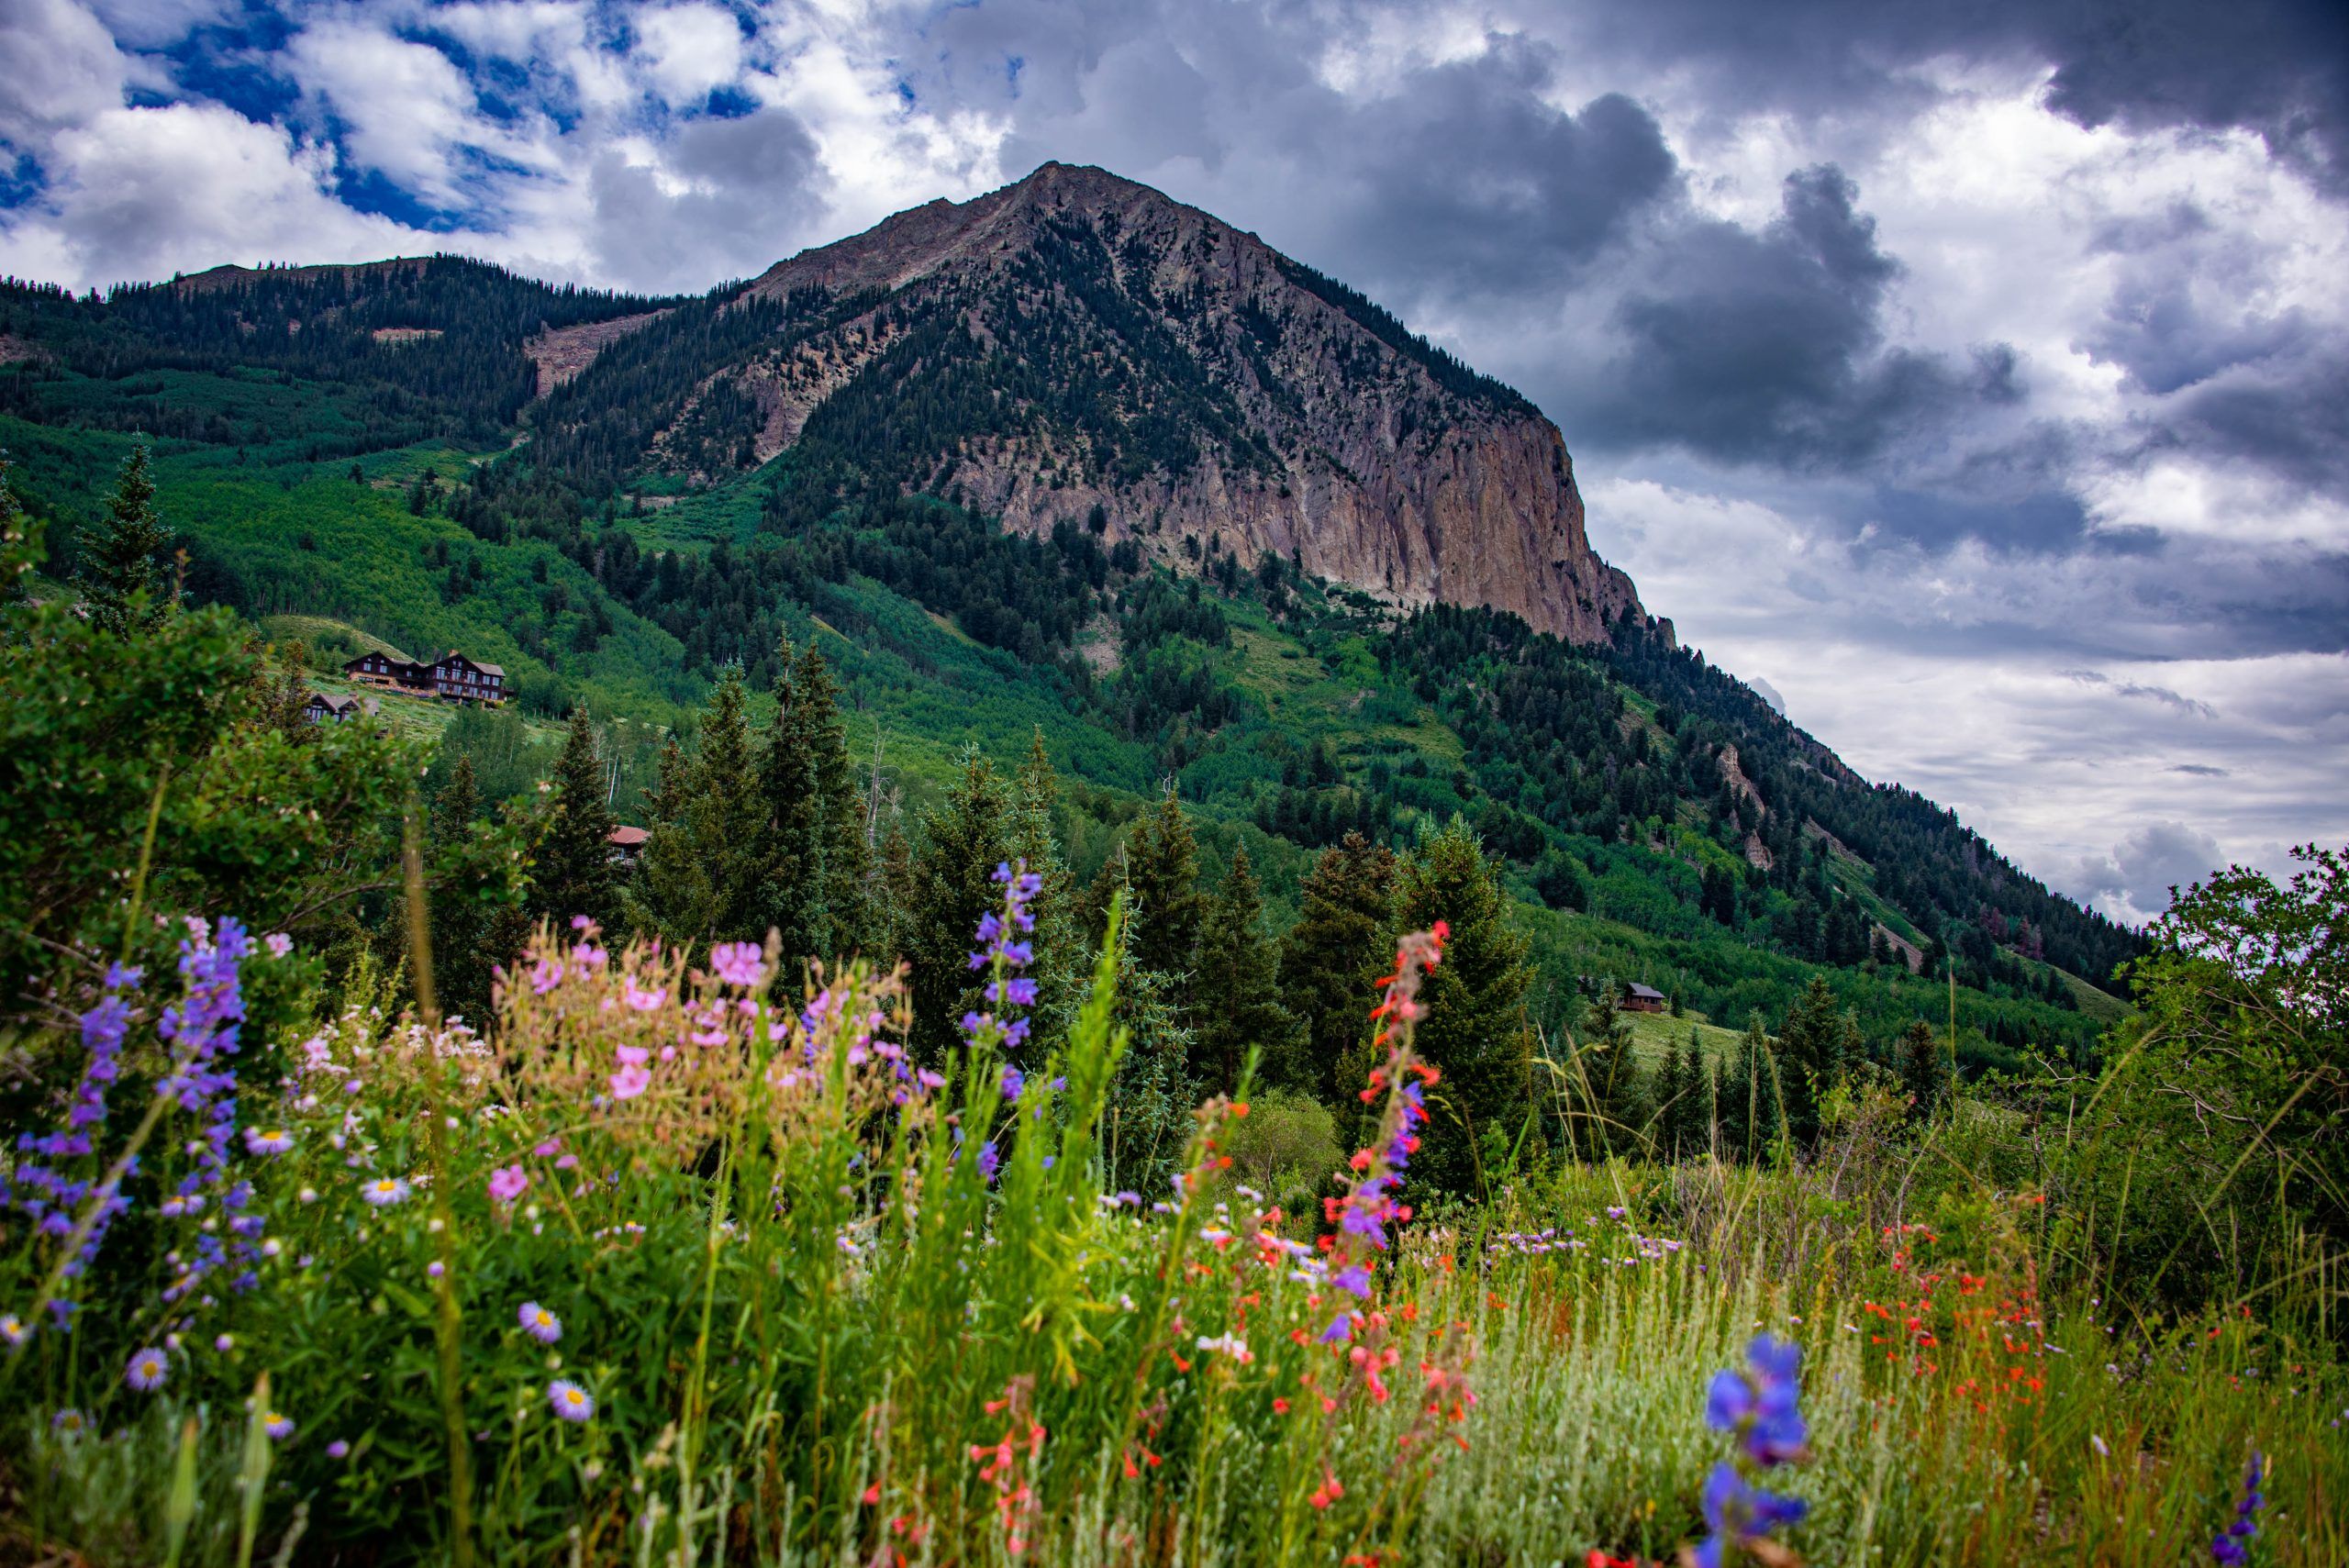 A field of wildflowers in front of Crested Butte Mountain in Crested Butte, Colorado.